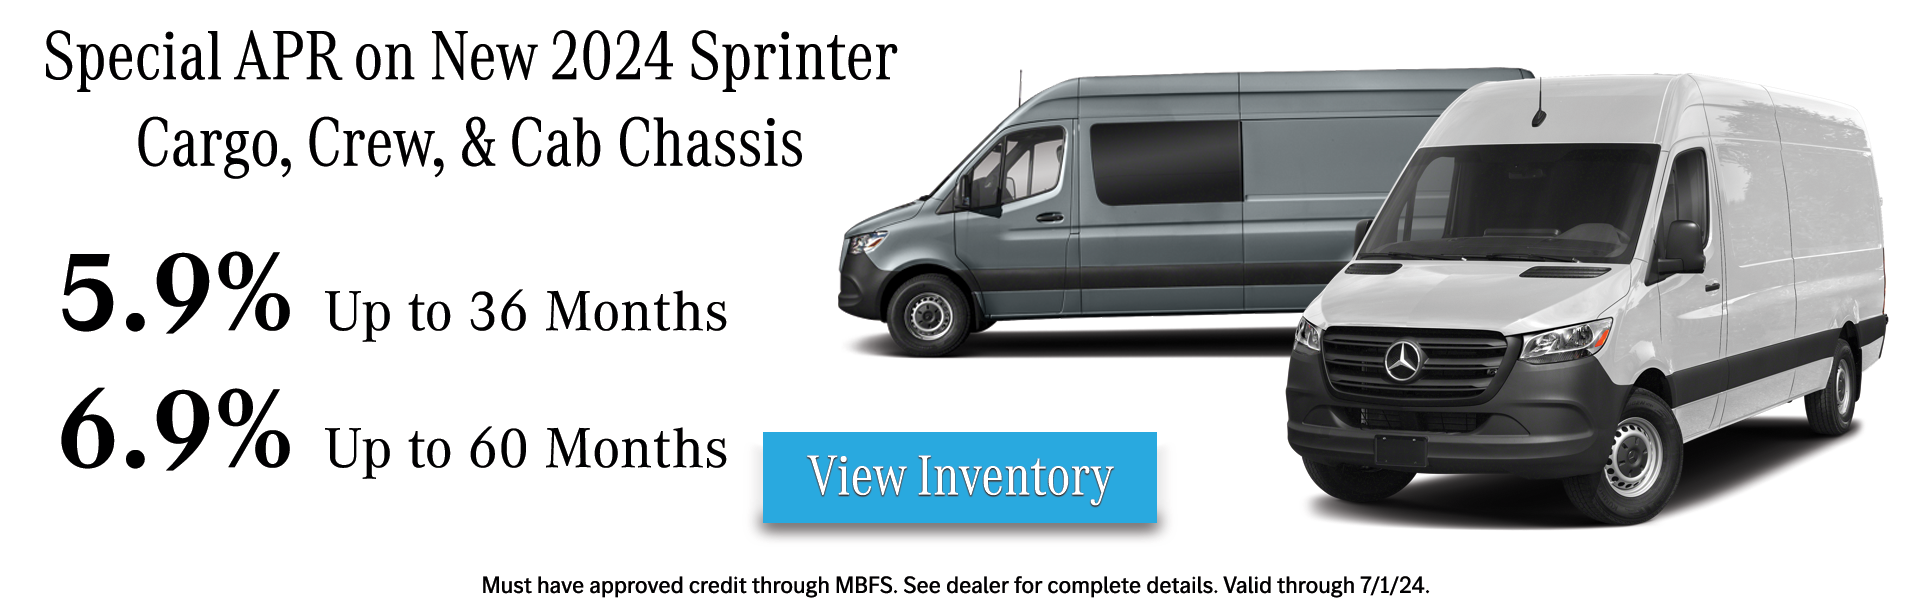 Special APR on New 2024 Sprinters